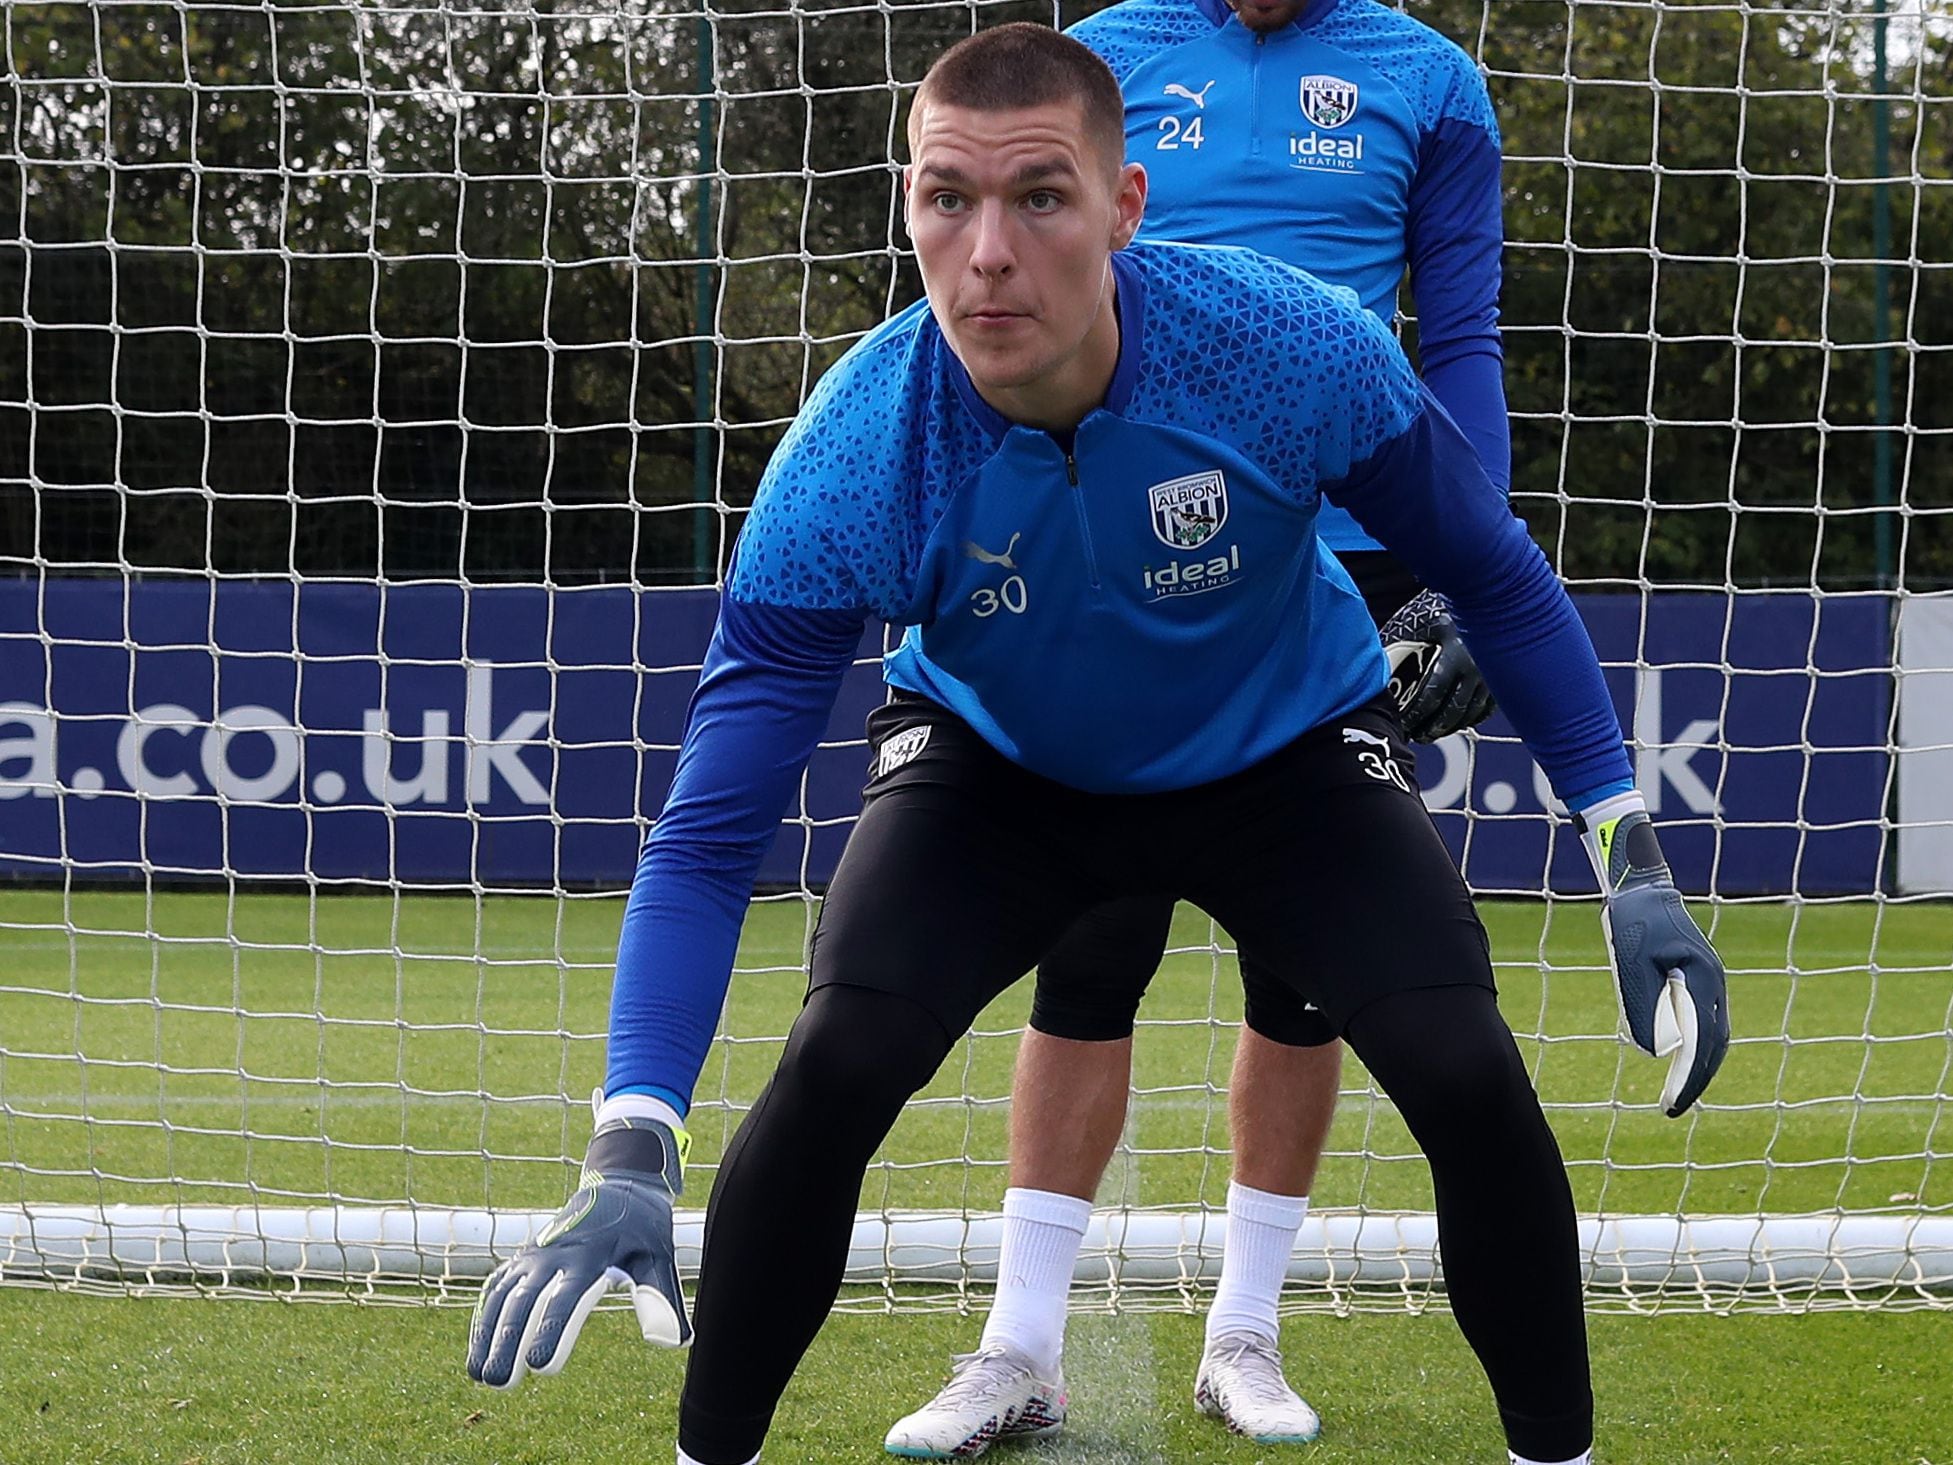 Goalkeeper Ted Cann agrees new West Brom deal and aspires to replicate duo